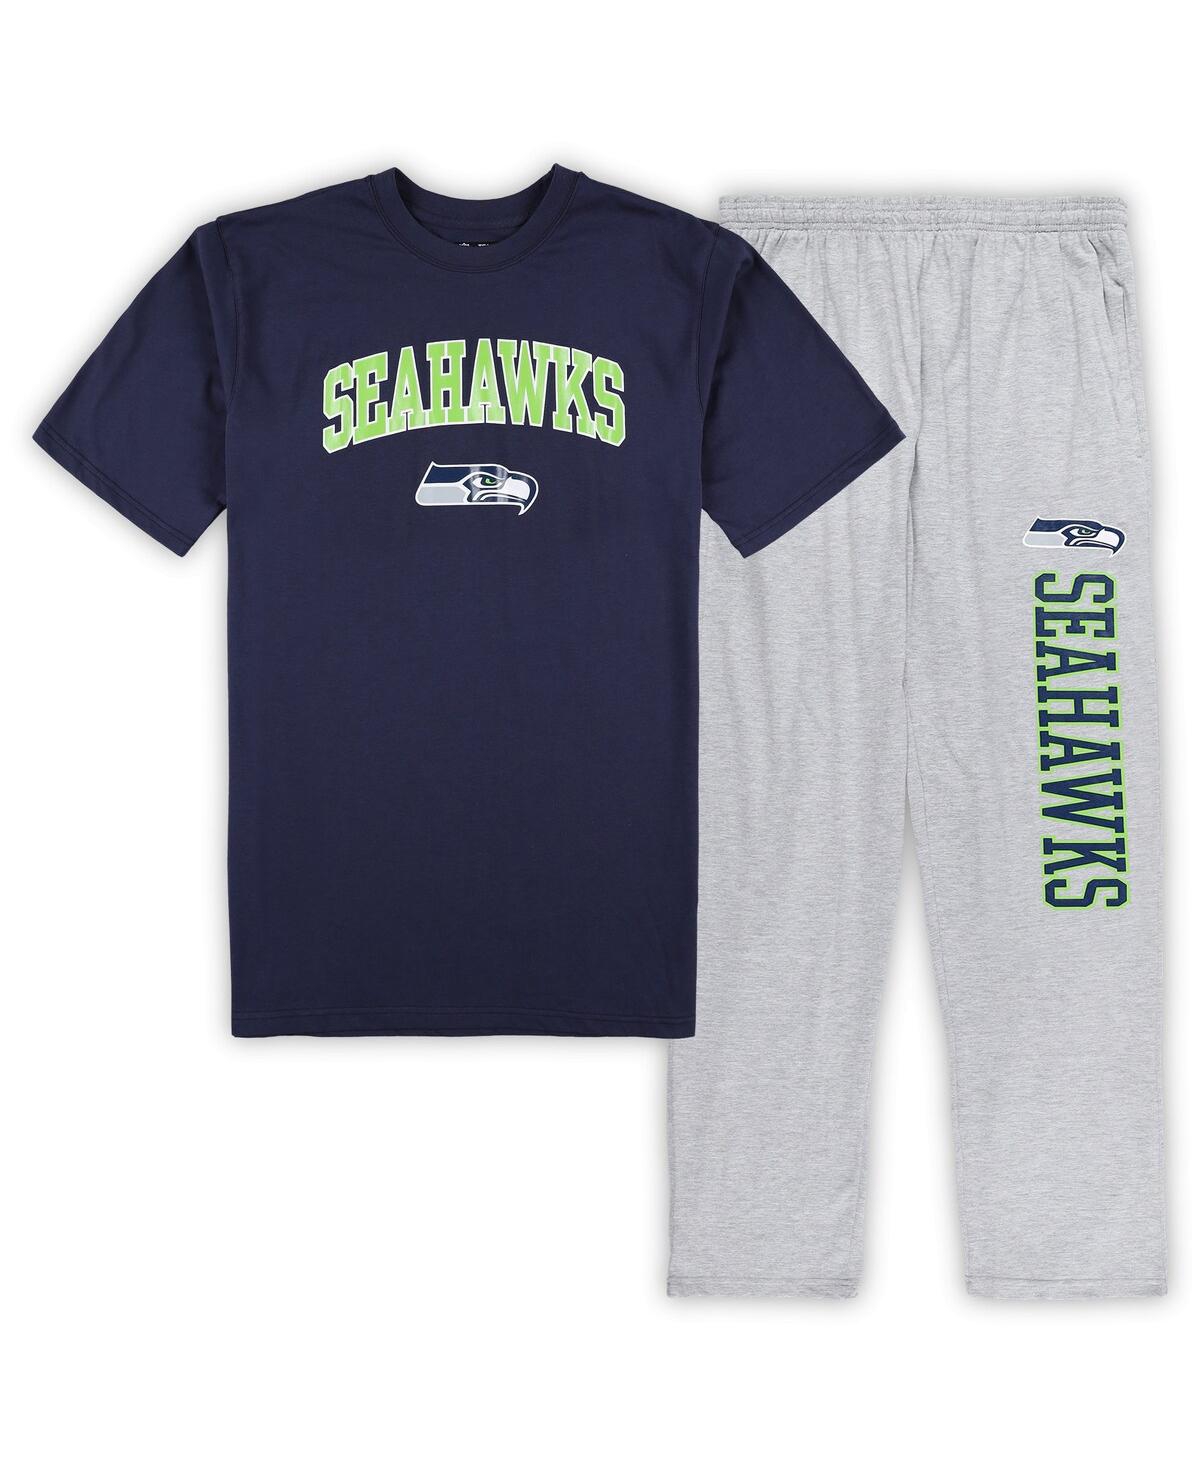 Men's Concepts Sport College Navy, Heather Gray Seattle Seahawks Big and Tall T-shirt and Pajama Pants Sleep Set - Navy, Heather Gray